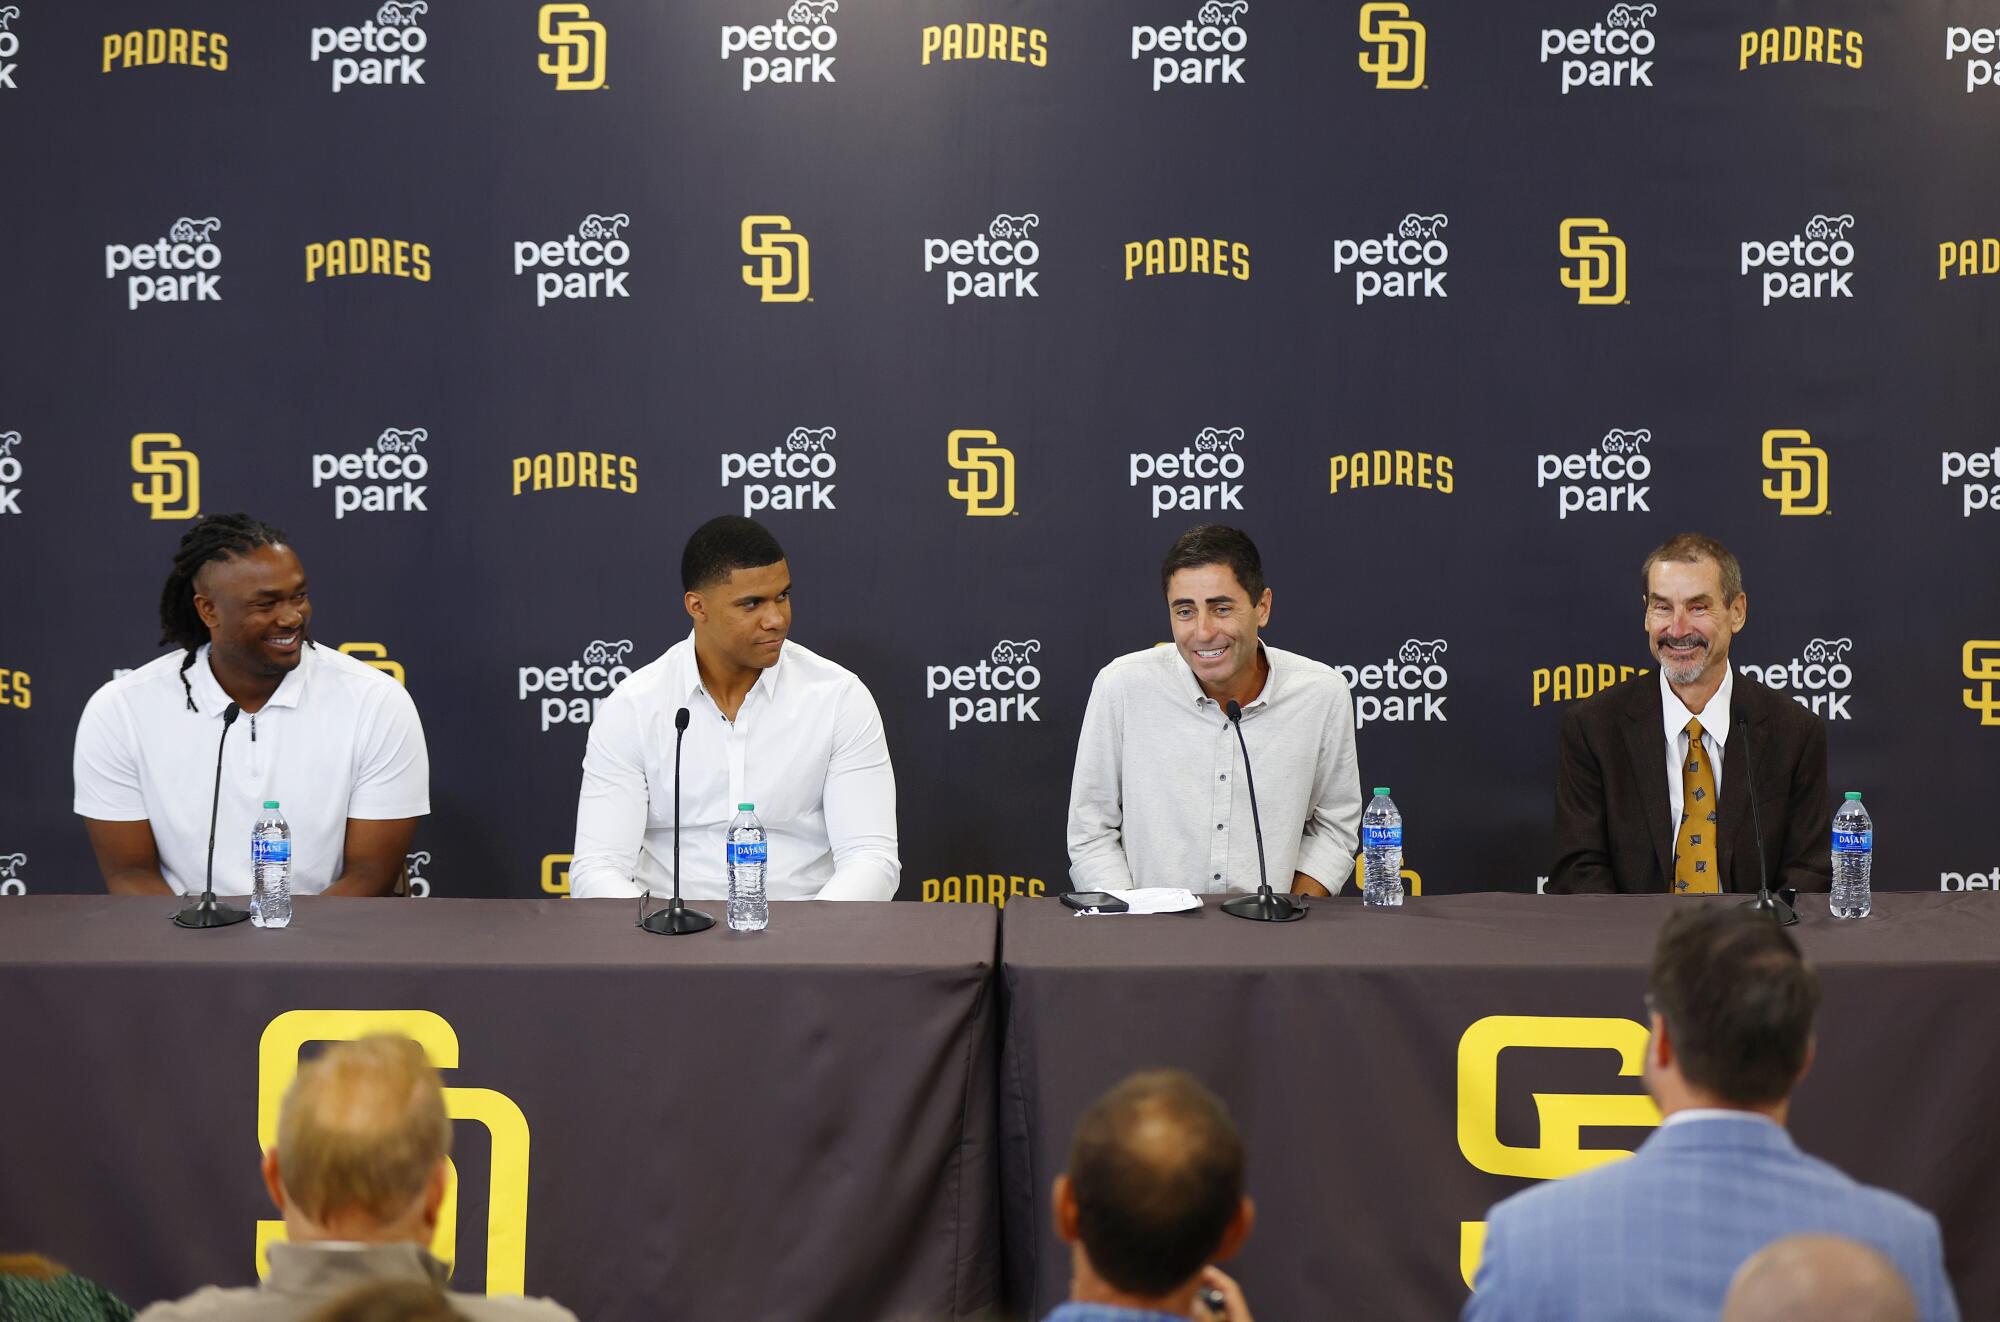 Juan Soto, Josh Bell introduced as newest Padres before debut in front of  frenzied crowd Wednesday night - The San Diego Union-Tribune